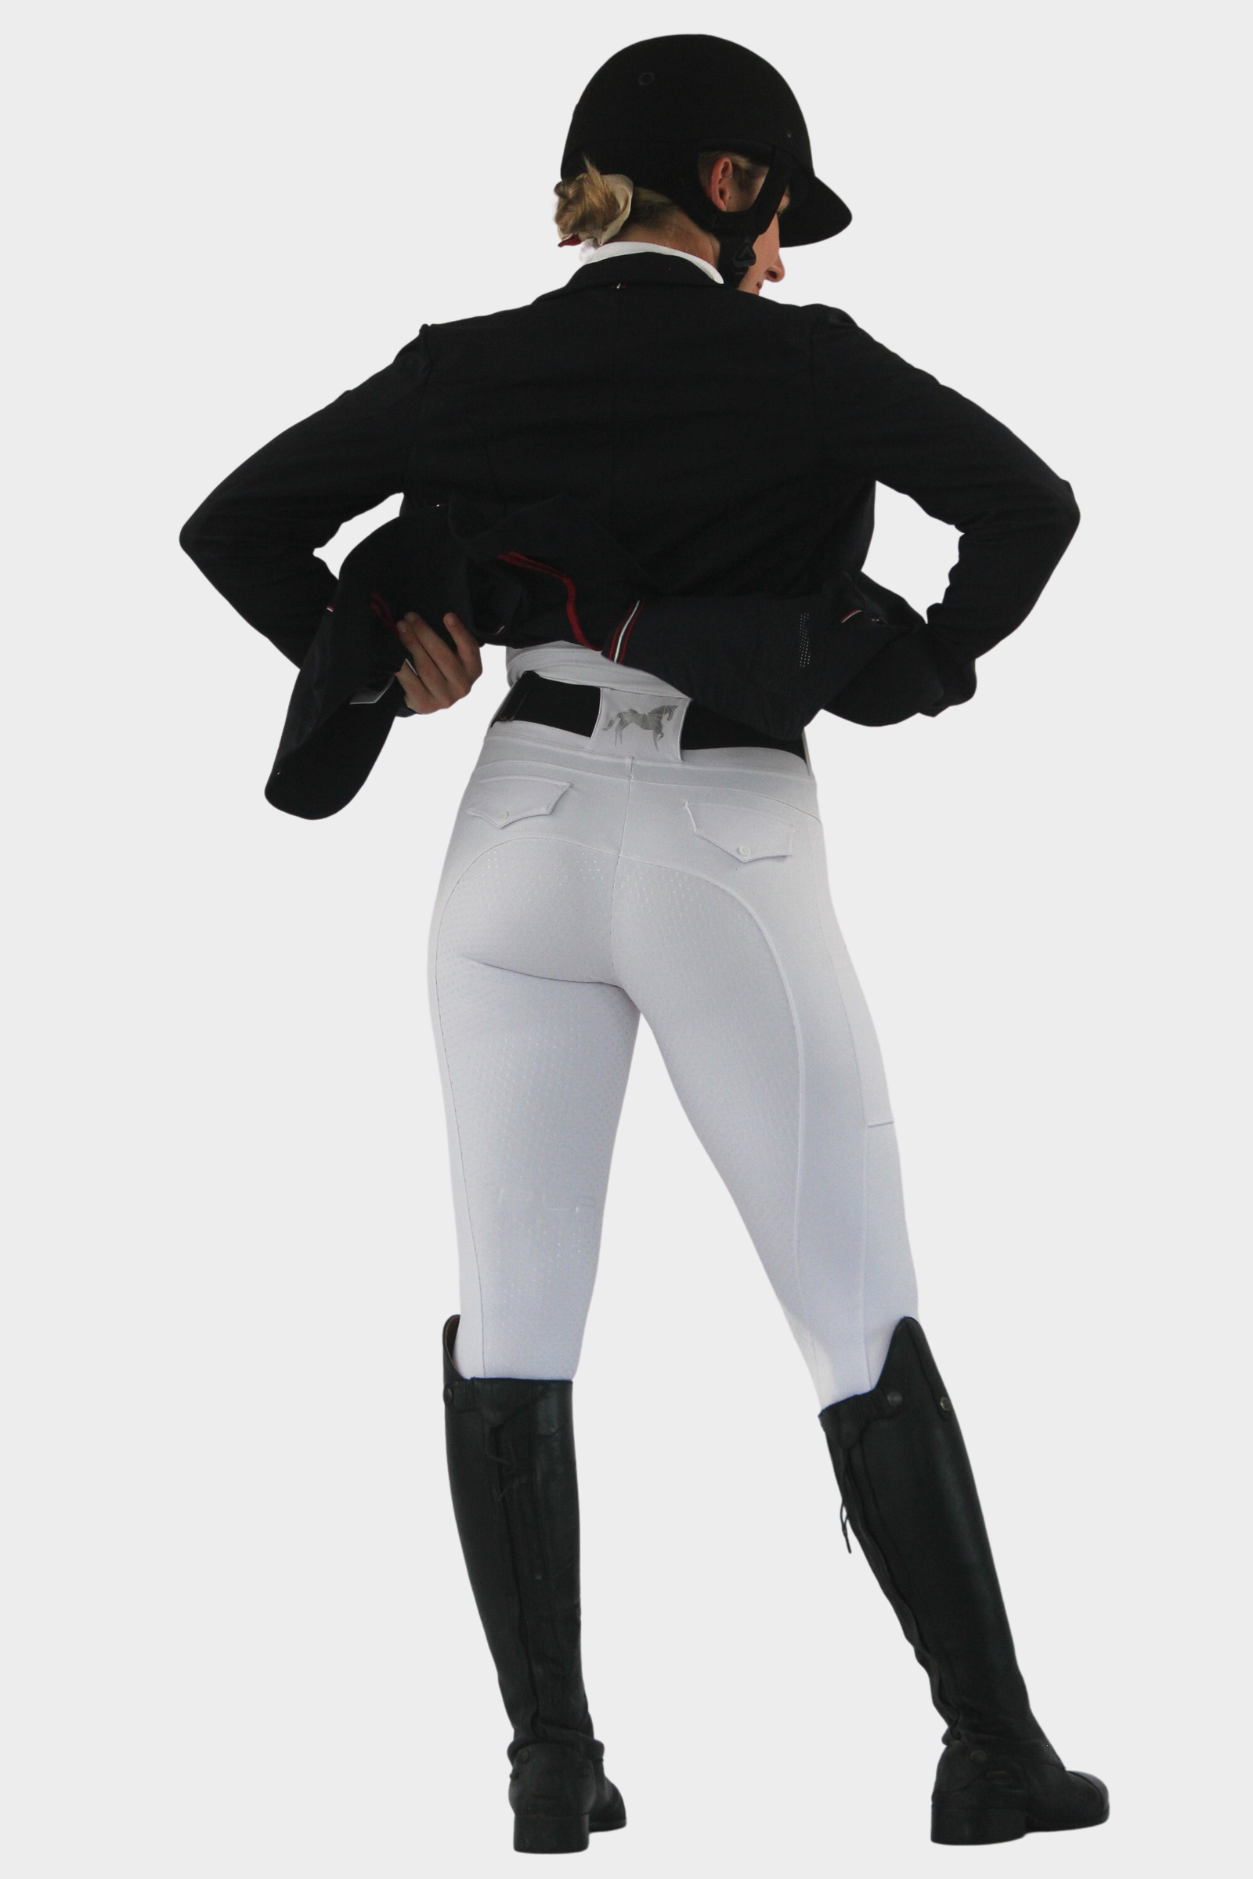 A person wearing a black equestrian helmet, black jacket, white riding breeches, and black riding boots is facing away from the camera, holding the bottom of their jacket with both hands. The background is white. The Pure Canter Competition Tights - White feature a silicone grip for enhanced stability.